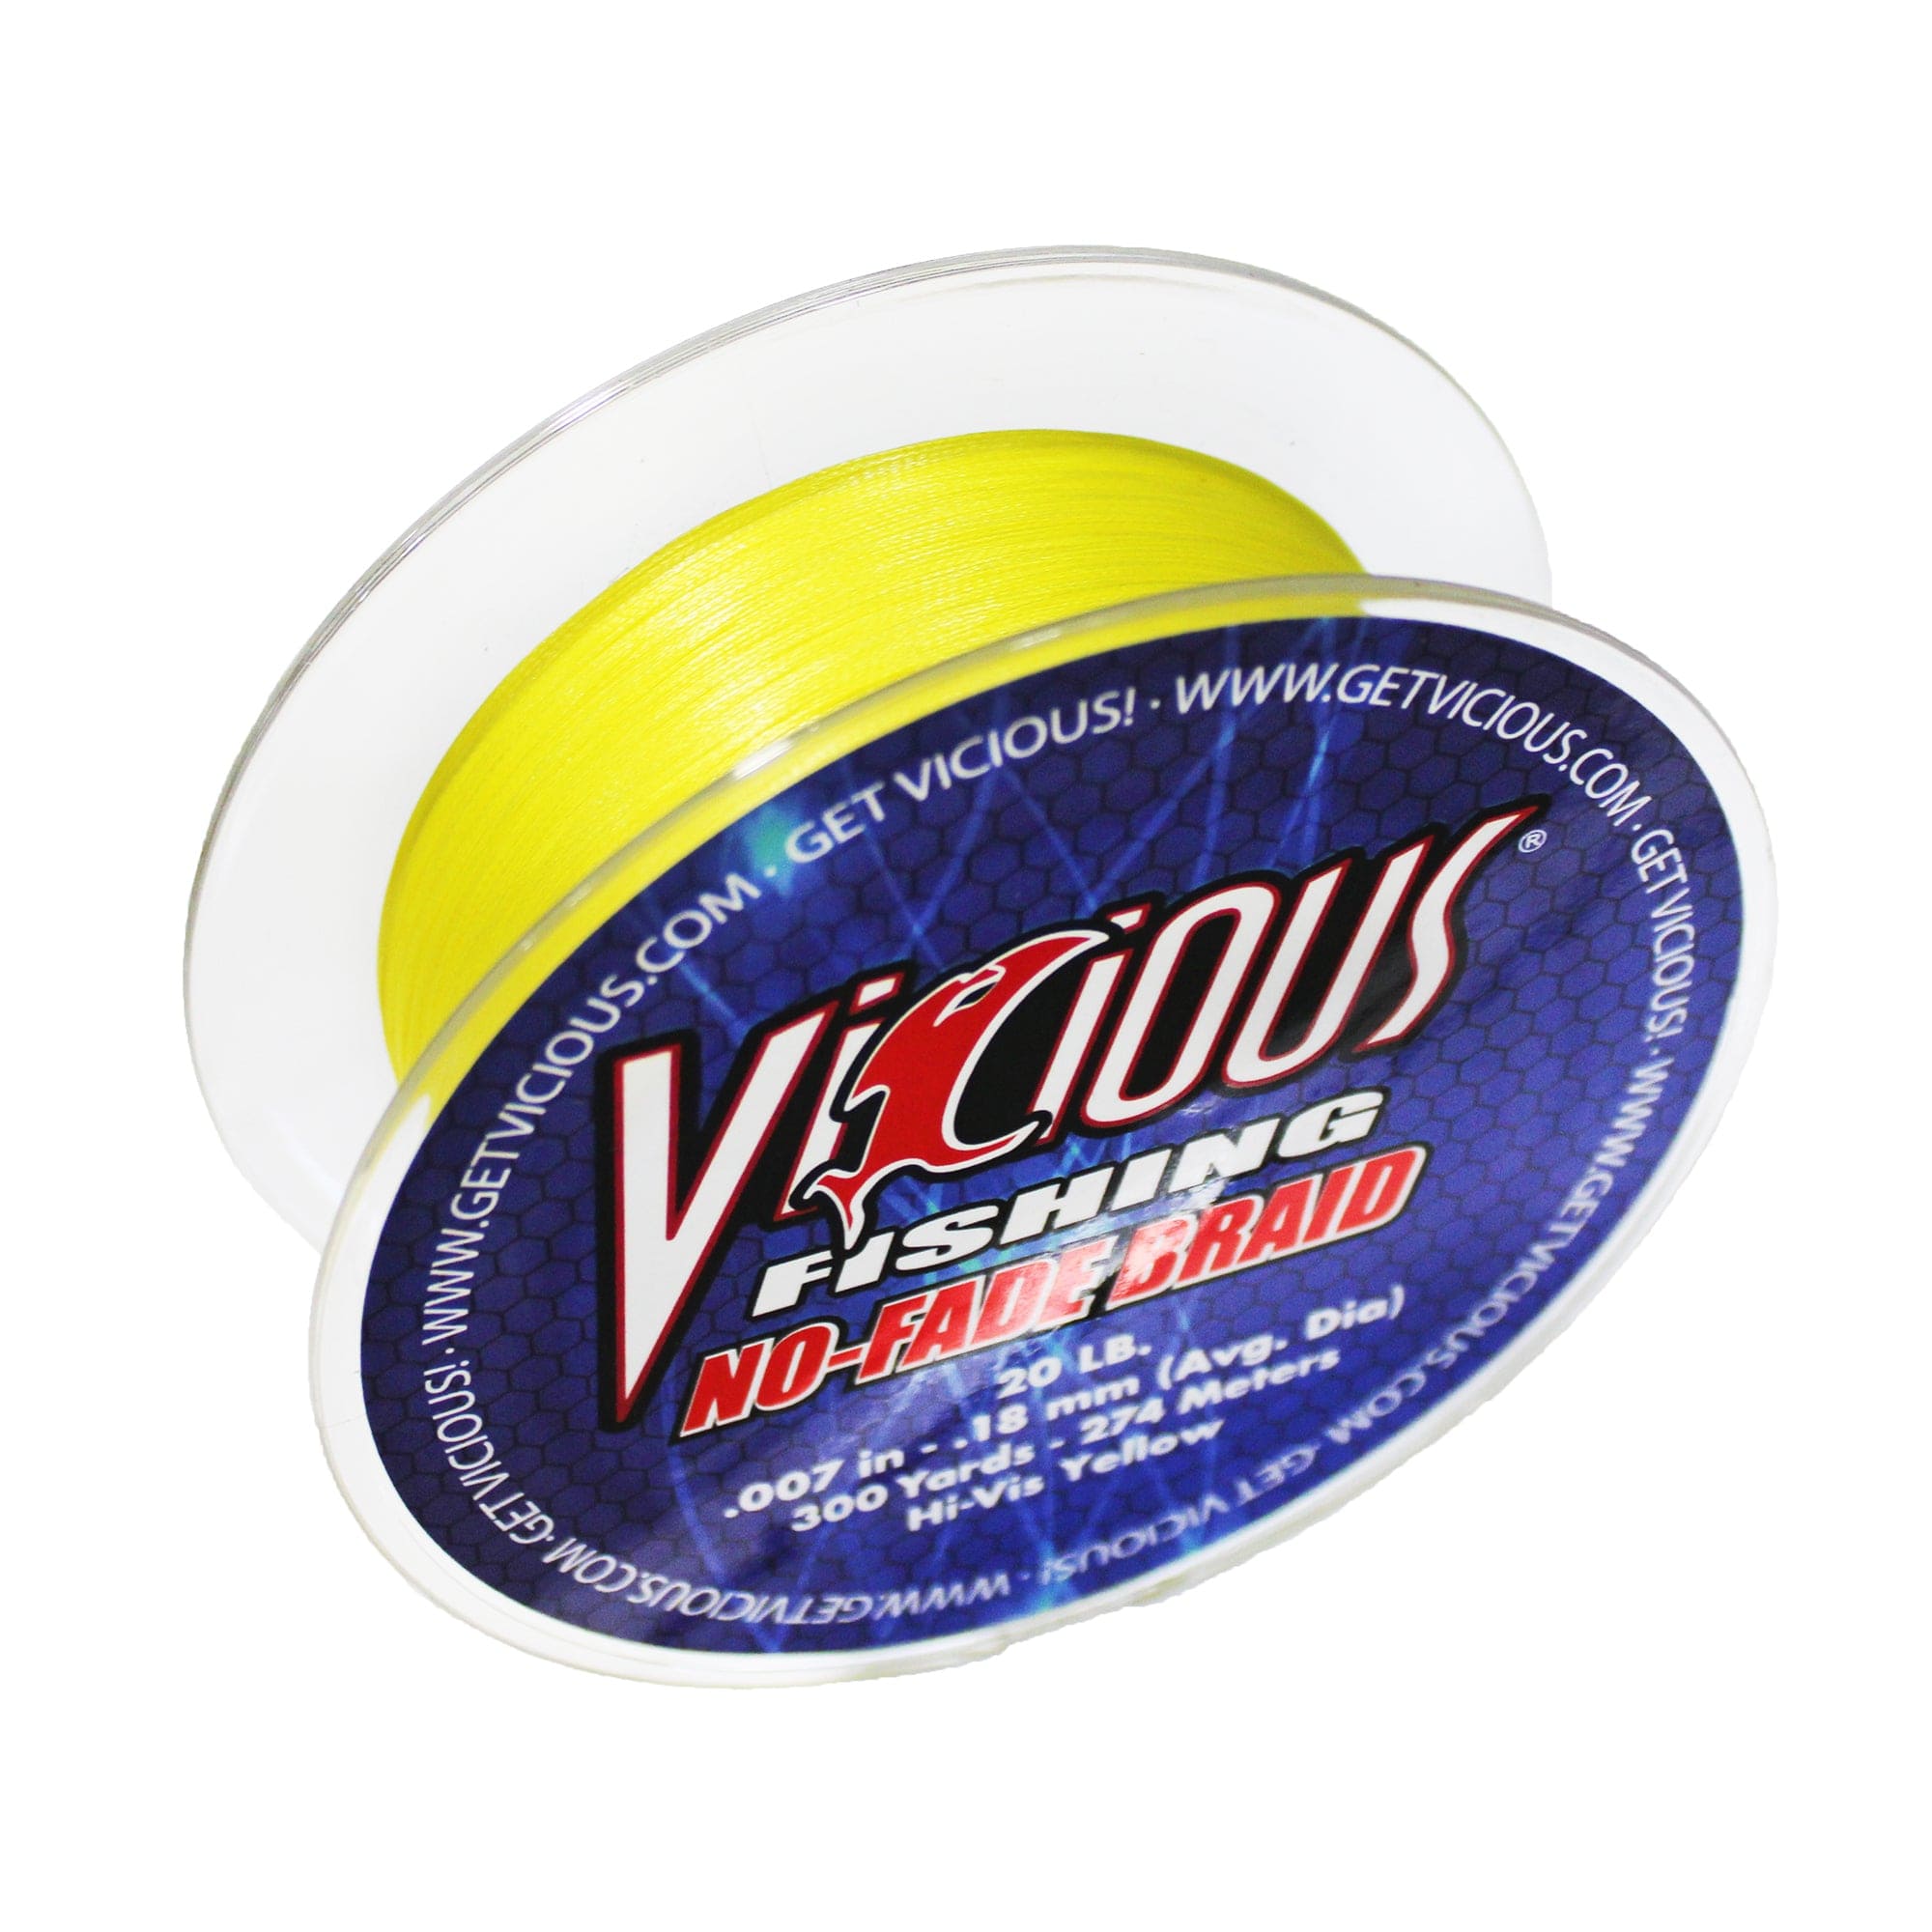 Vicious Ultimate Clear Mono - 100 Yards , brand vacious